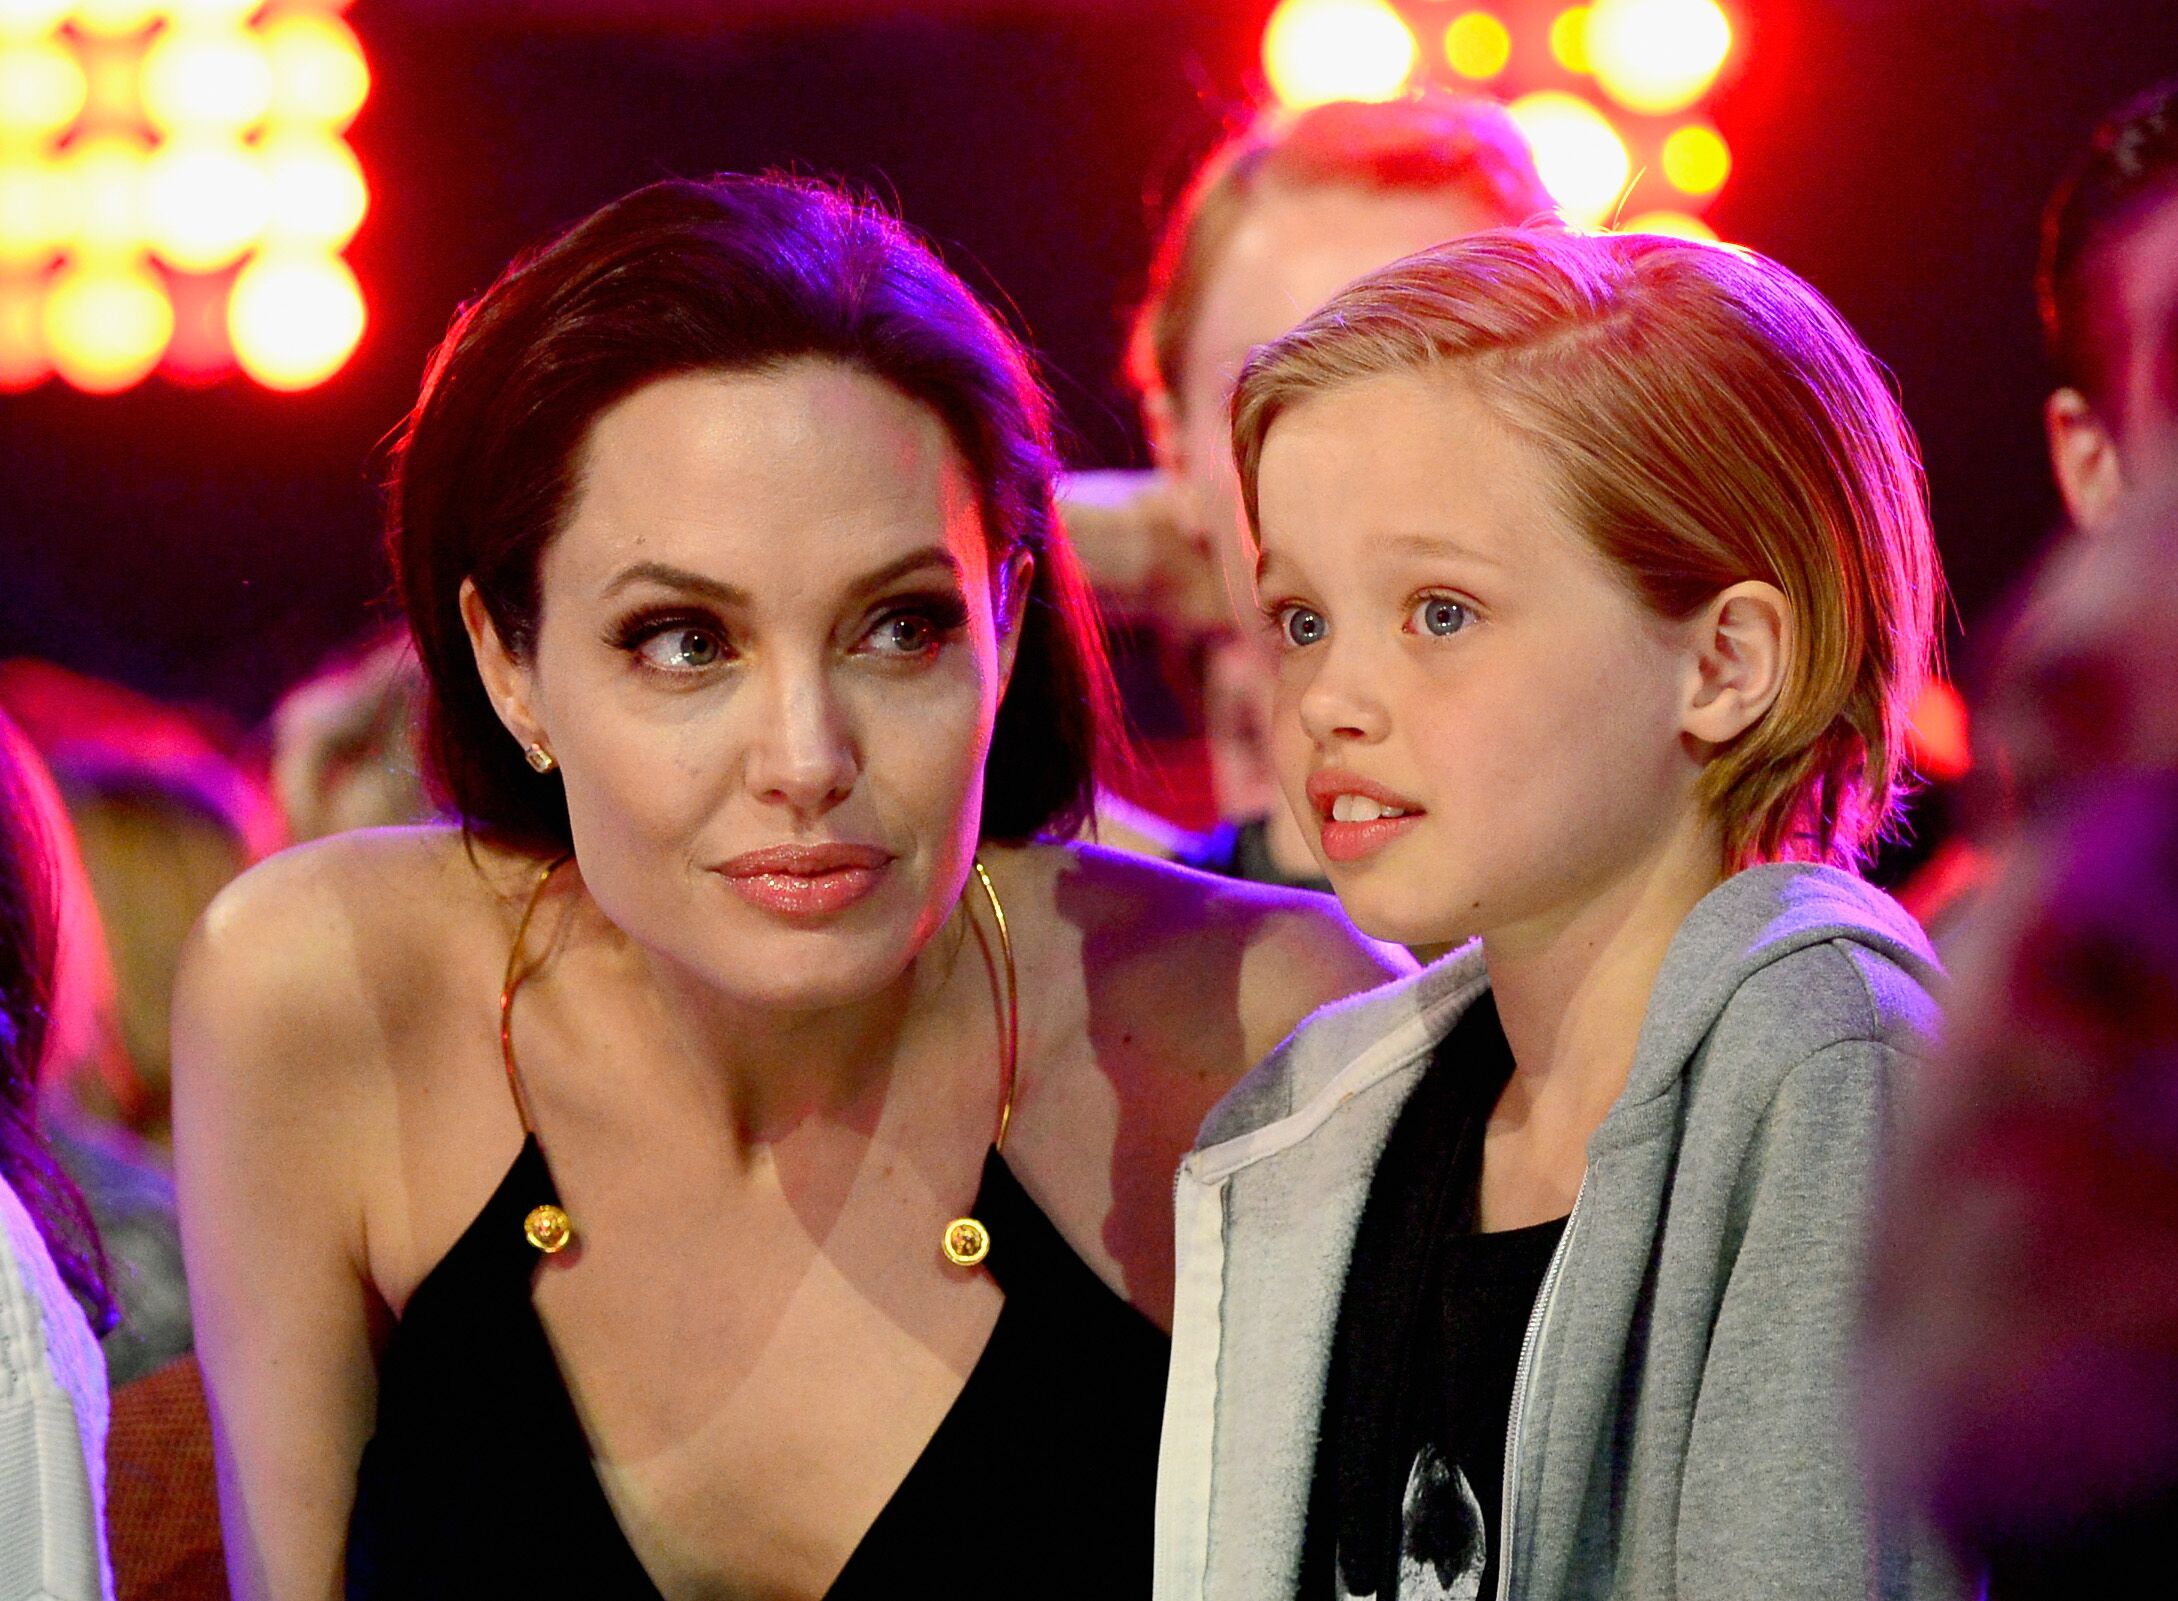  Angelina Jolie and Shiloh Nouvel Jolie-Pitt at the Nickelodeon's 28th Annual Kids' Choice Awards in 2015 | Source: Getty Images